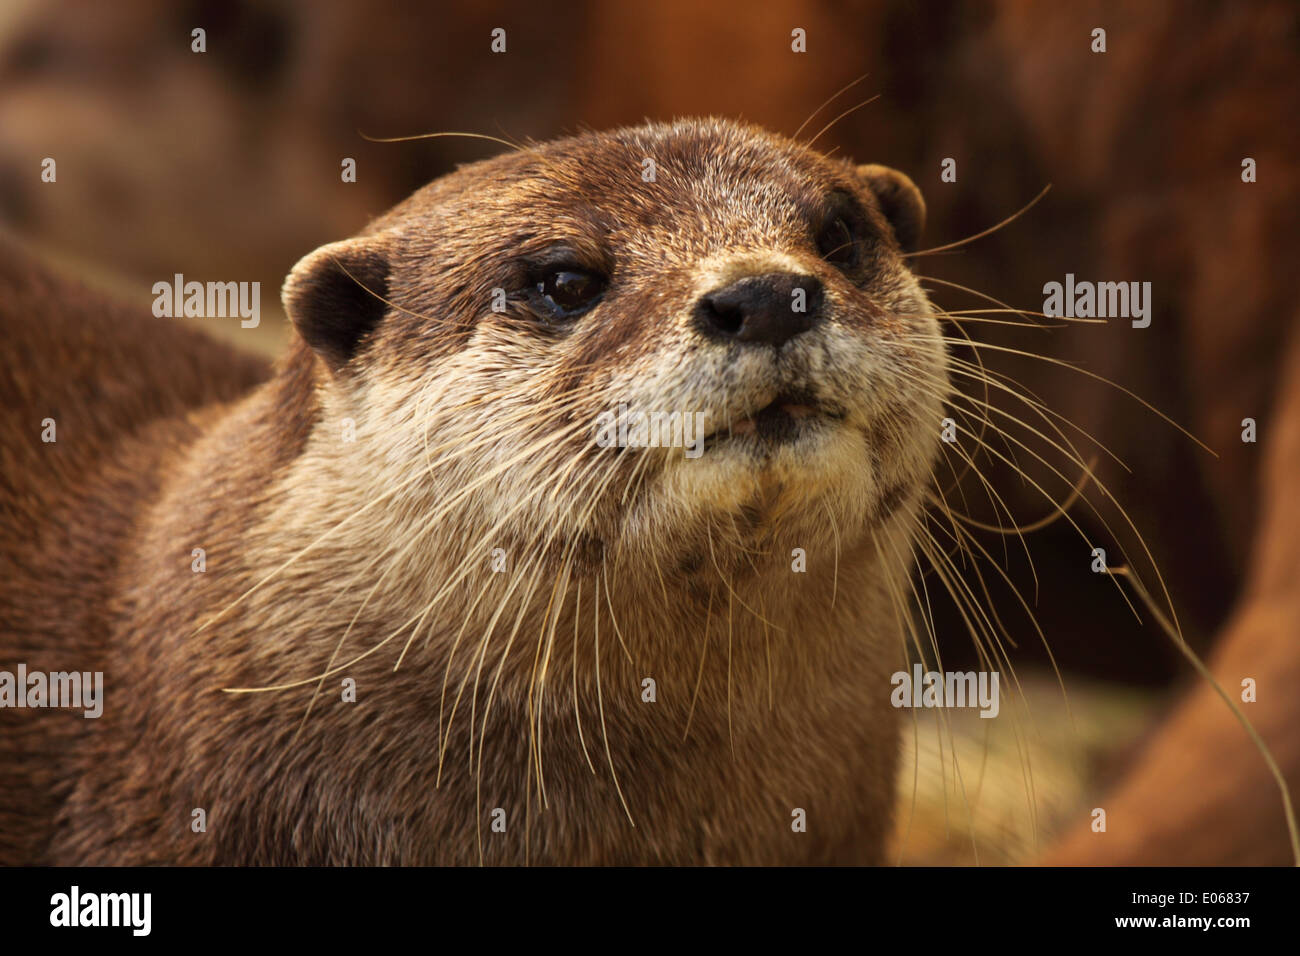 A pugnacious portrait of an African Clawless Otter. Stock Photo